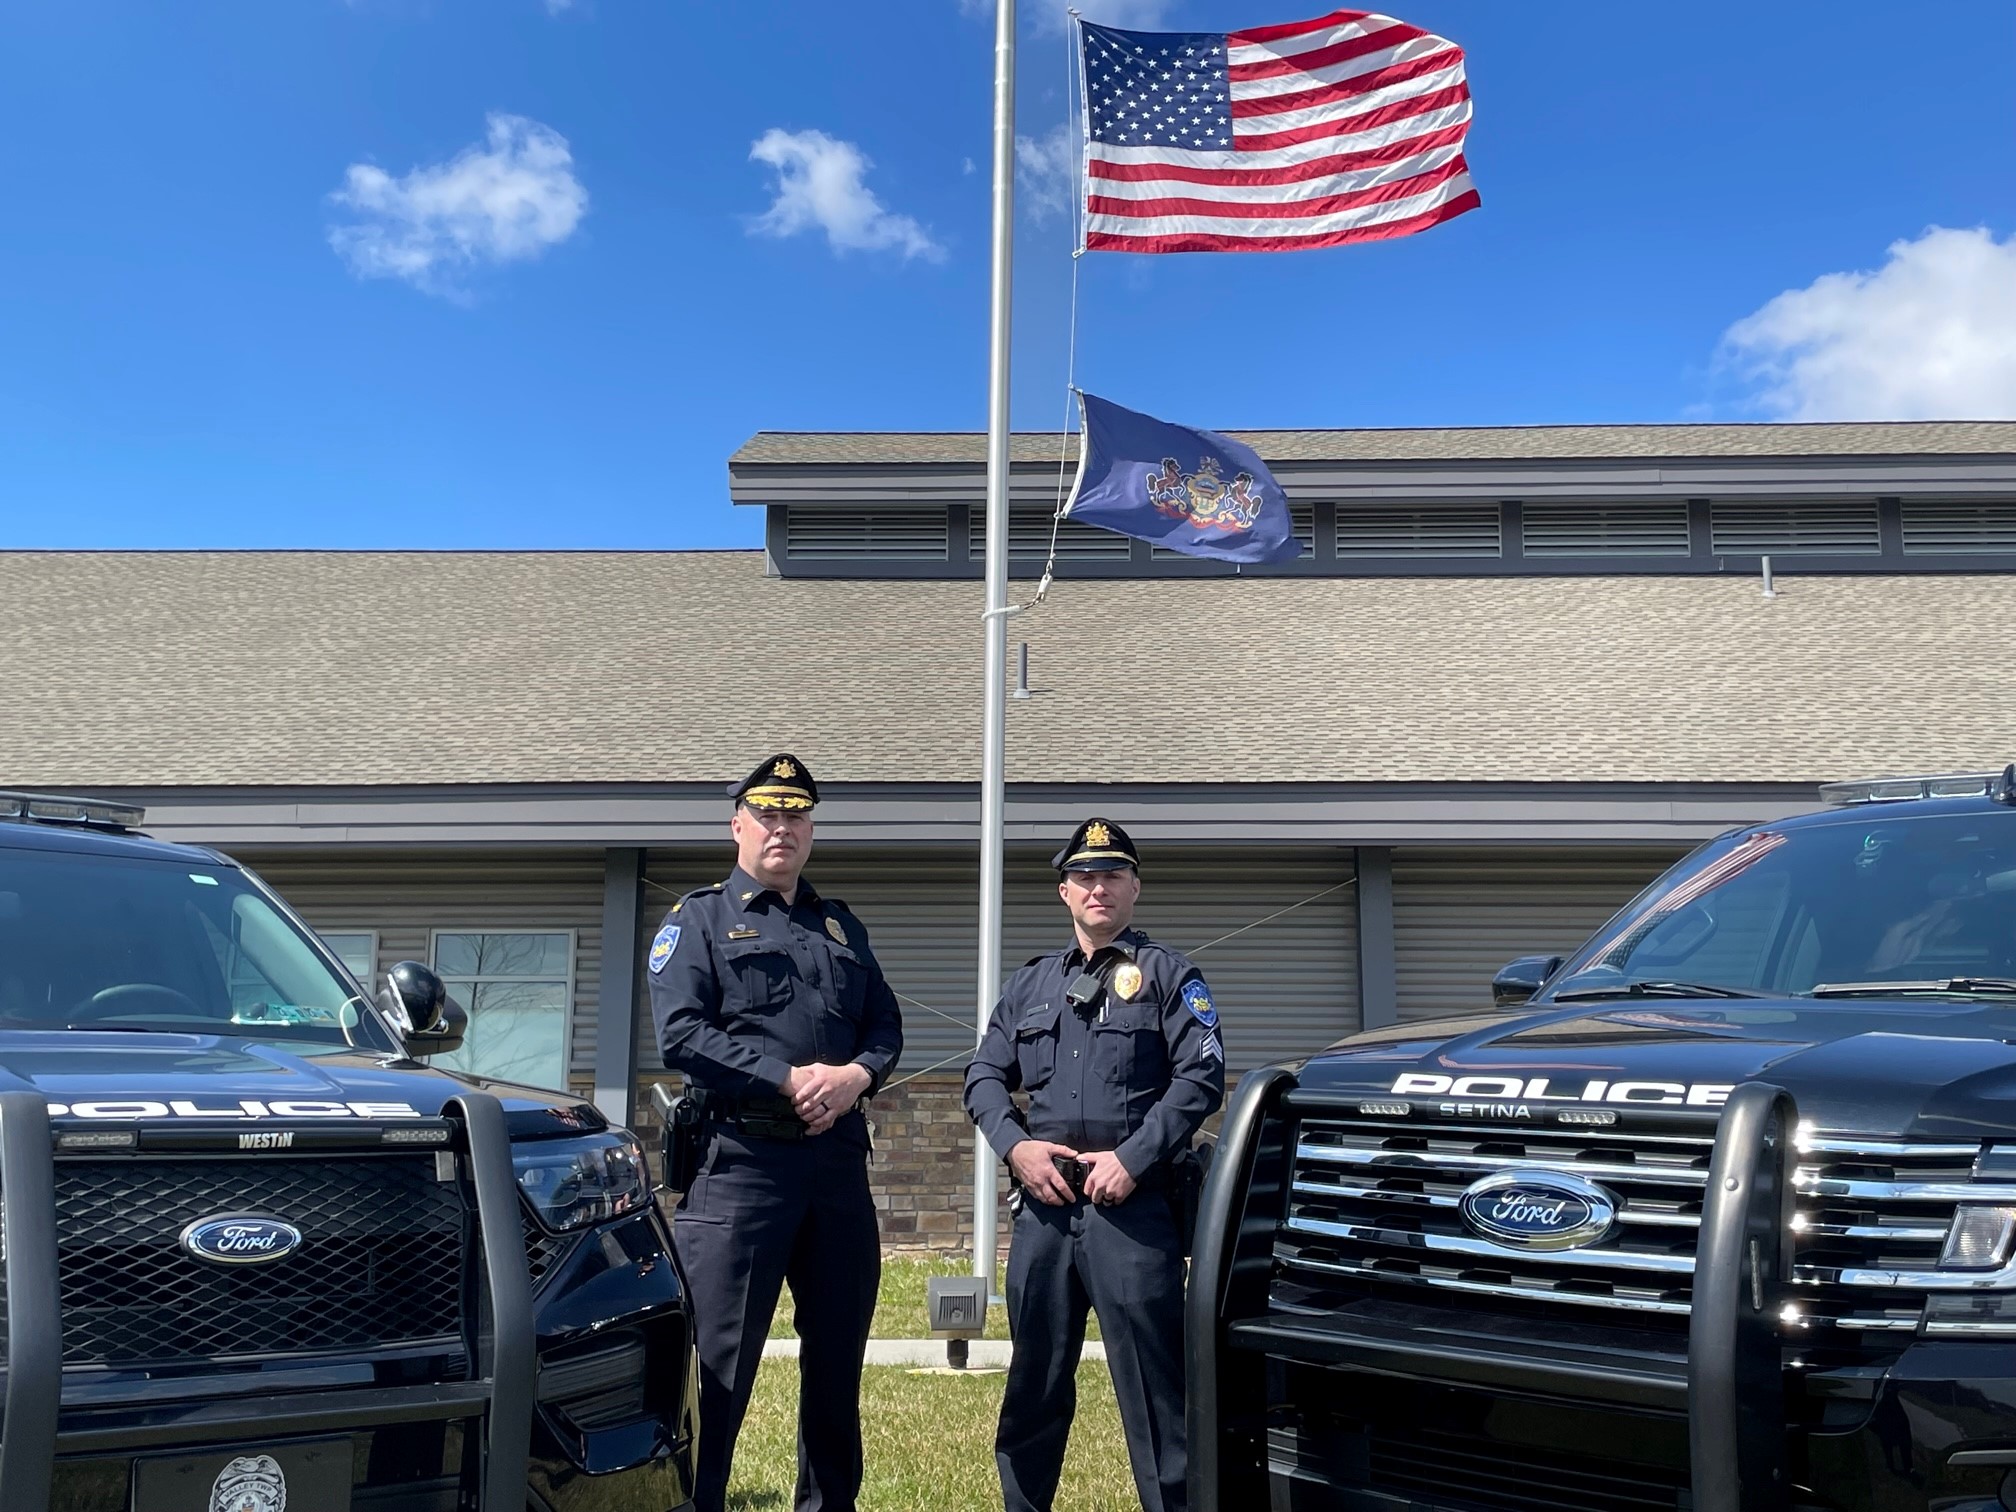 Chief Eckman and Sergeant Parker with Valley Township Police Department Cars